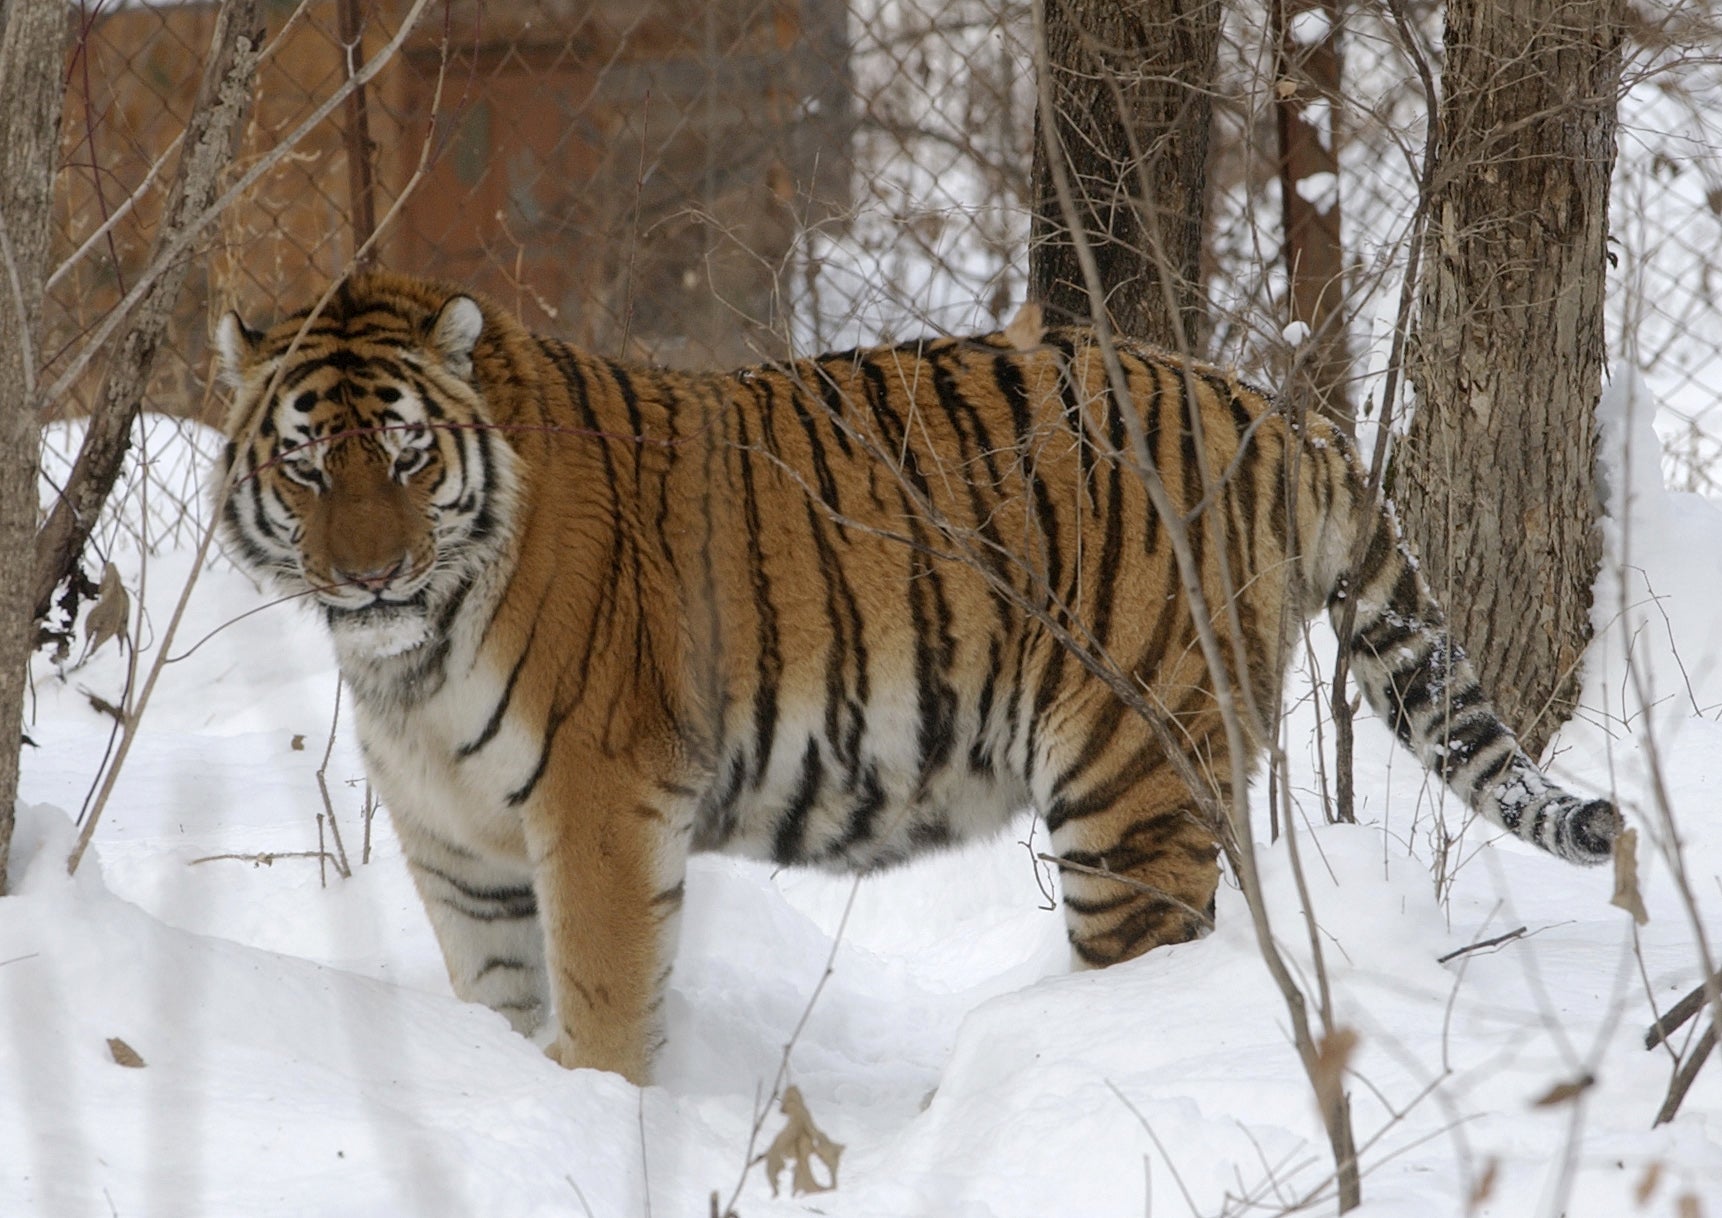 Lutiy, an endangered Amur tiger, roams in his cage at the Wild Animals Rehabilitation Center at the Sikhote-Alin Nature Monument, Russia on Monday, December 5, 2005